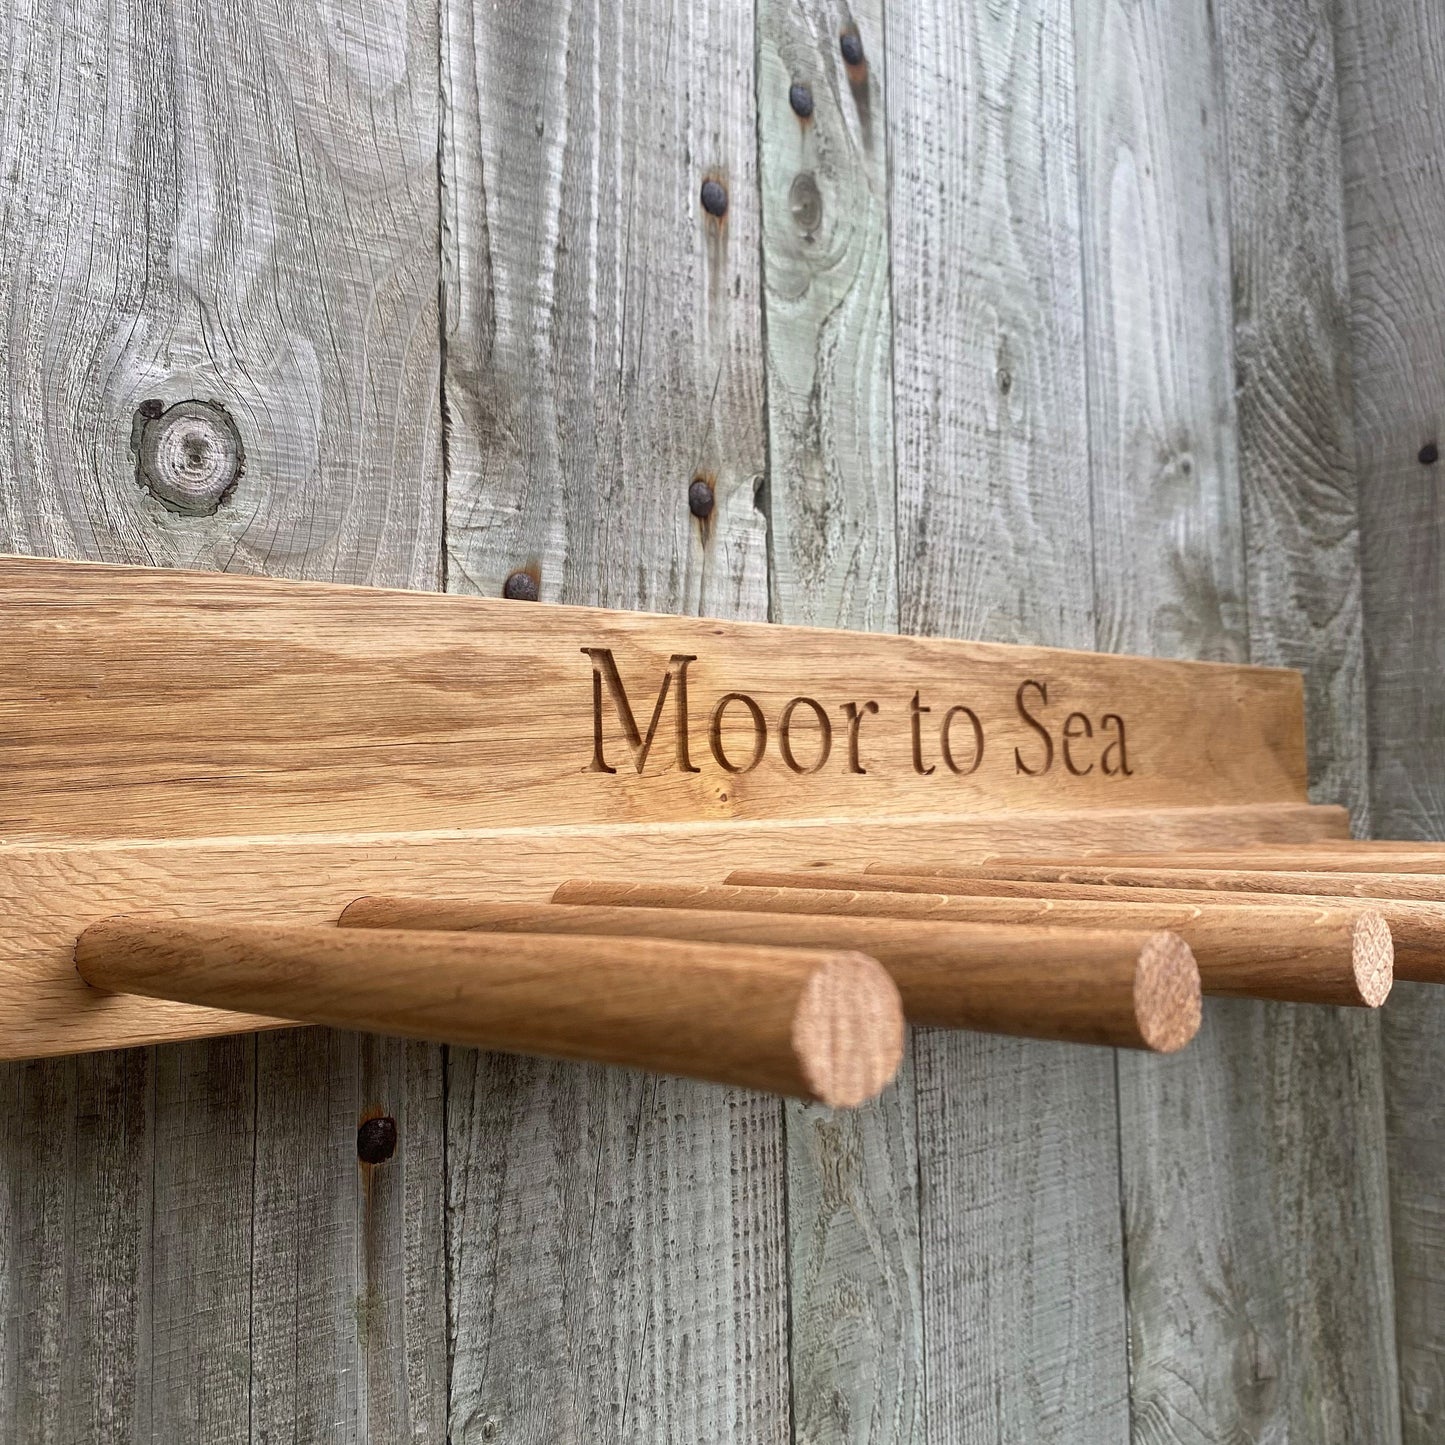 Classic Wooden Engraved Boot Rack